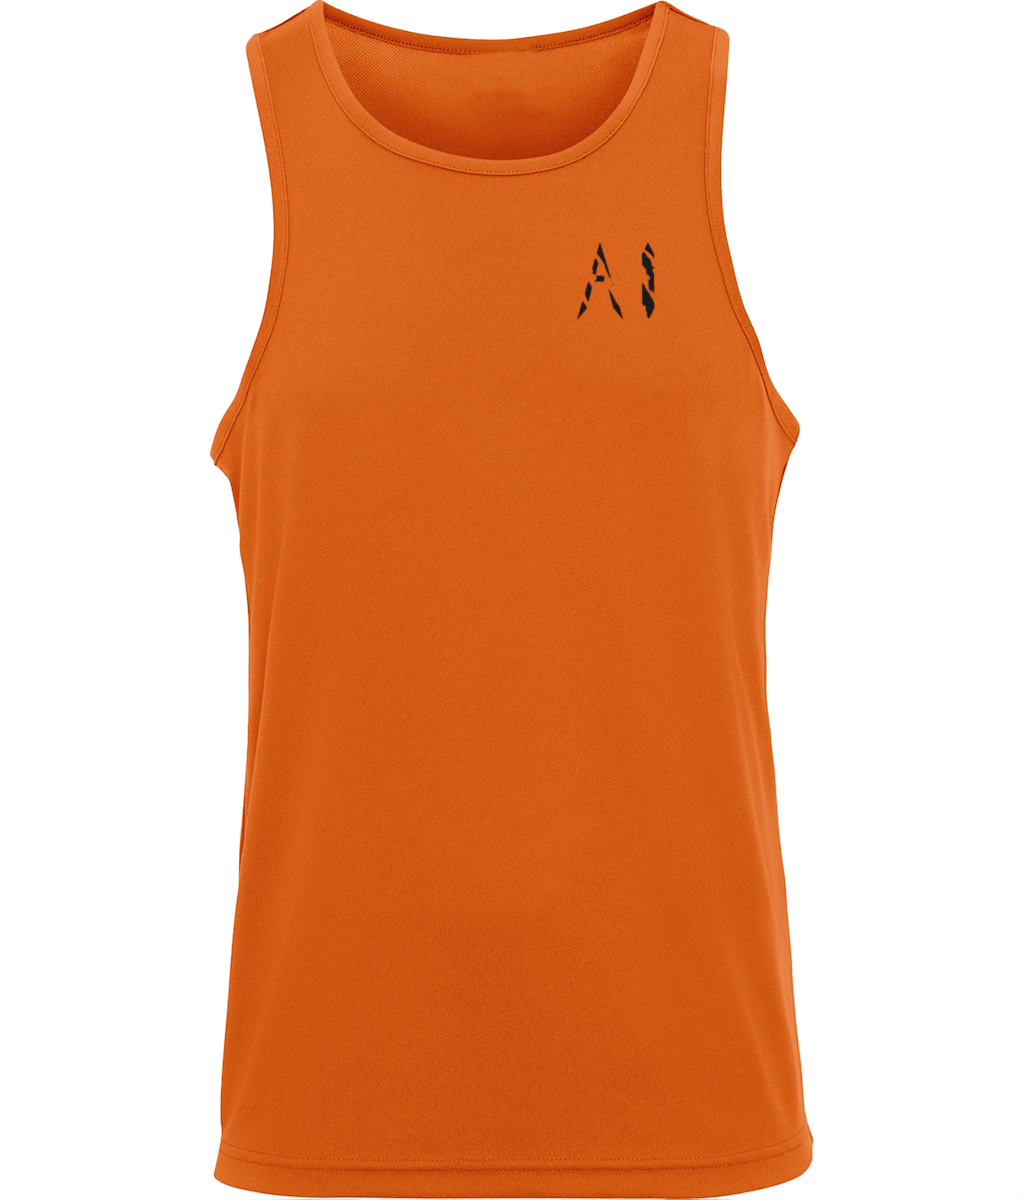 Mens Orange Workout Sports Vest with black AI logo written on the left chest